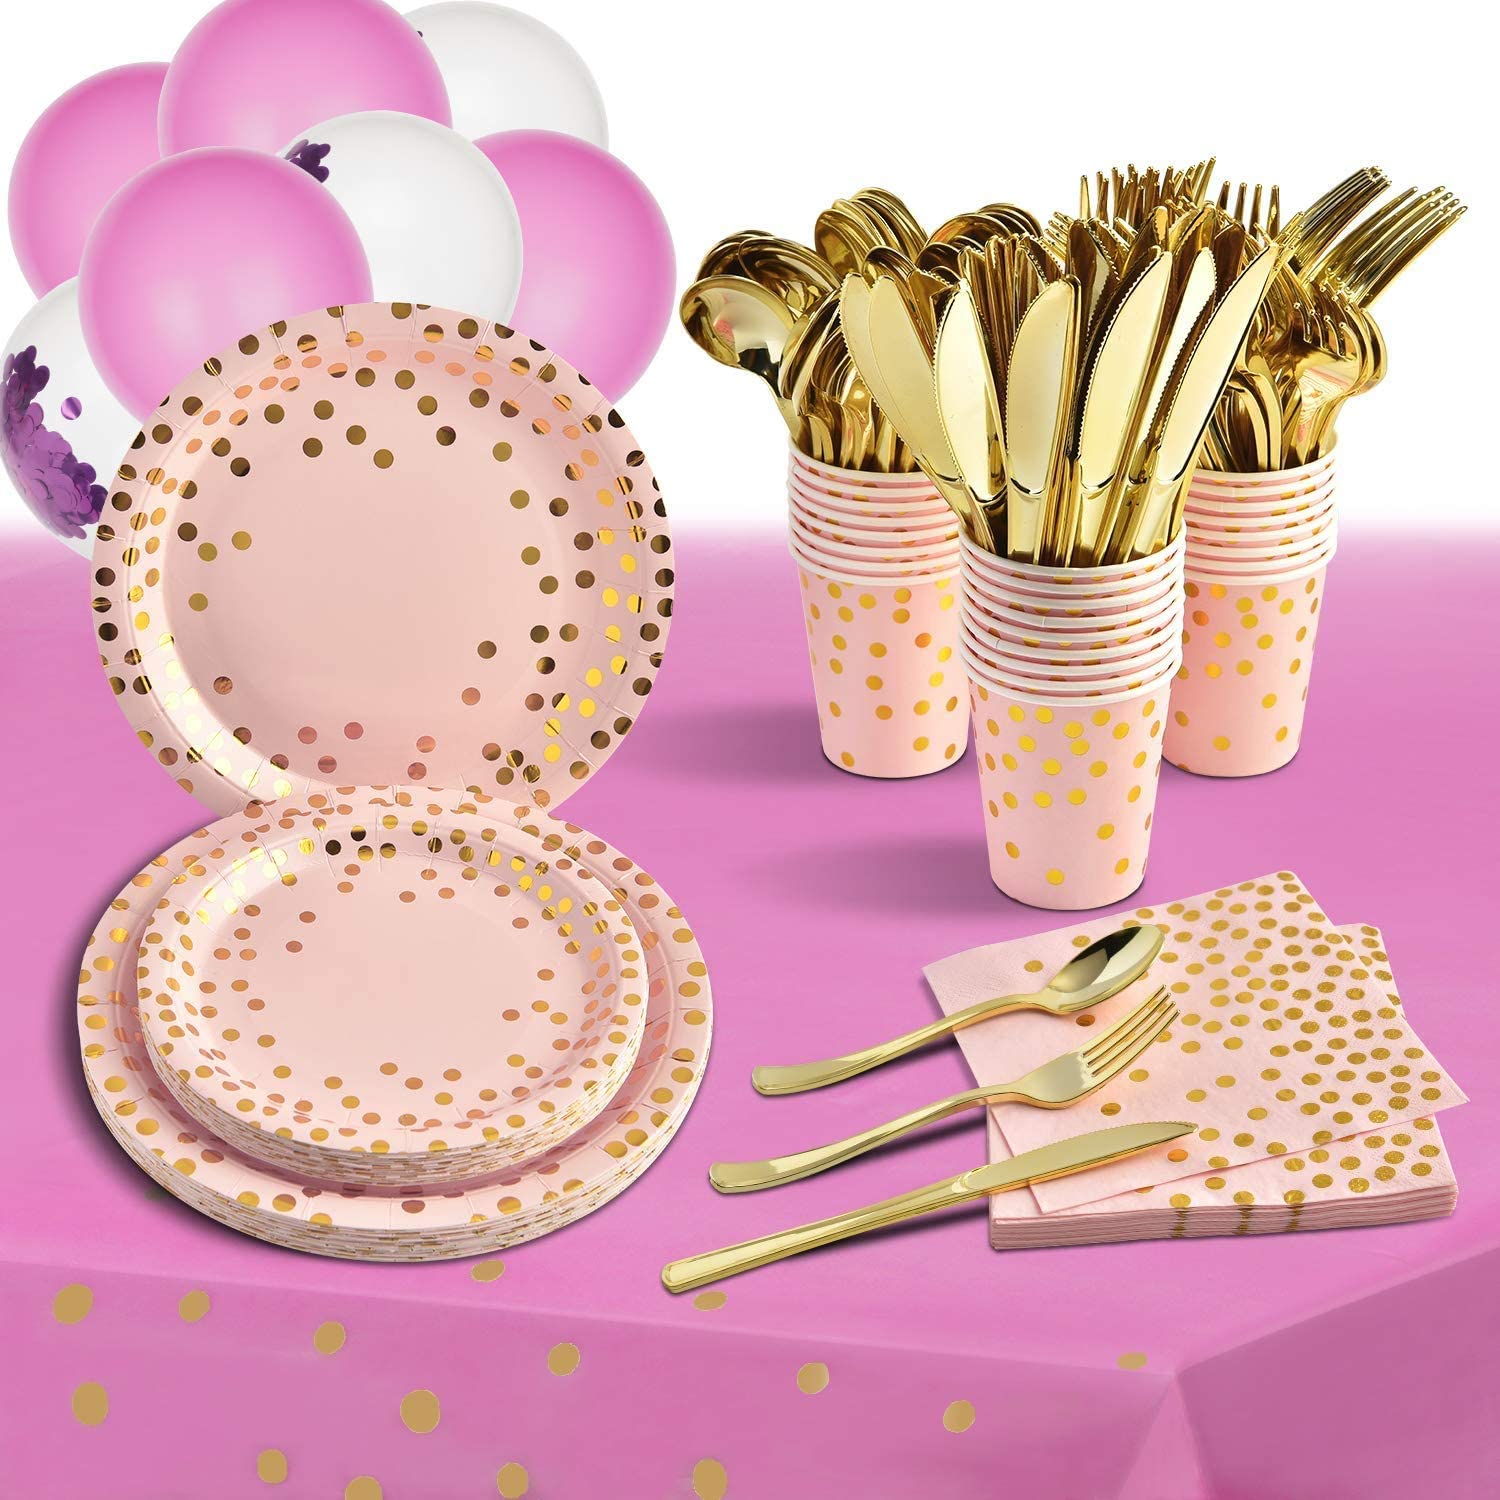 Pink and Gold Party Supplies Plastic Dinnerware Set